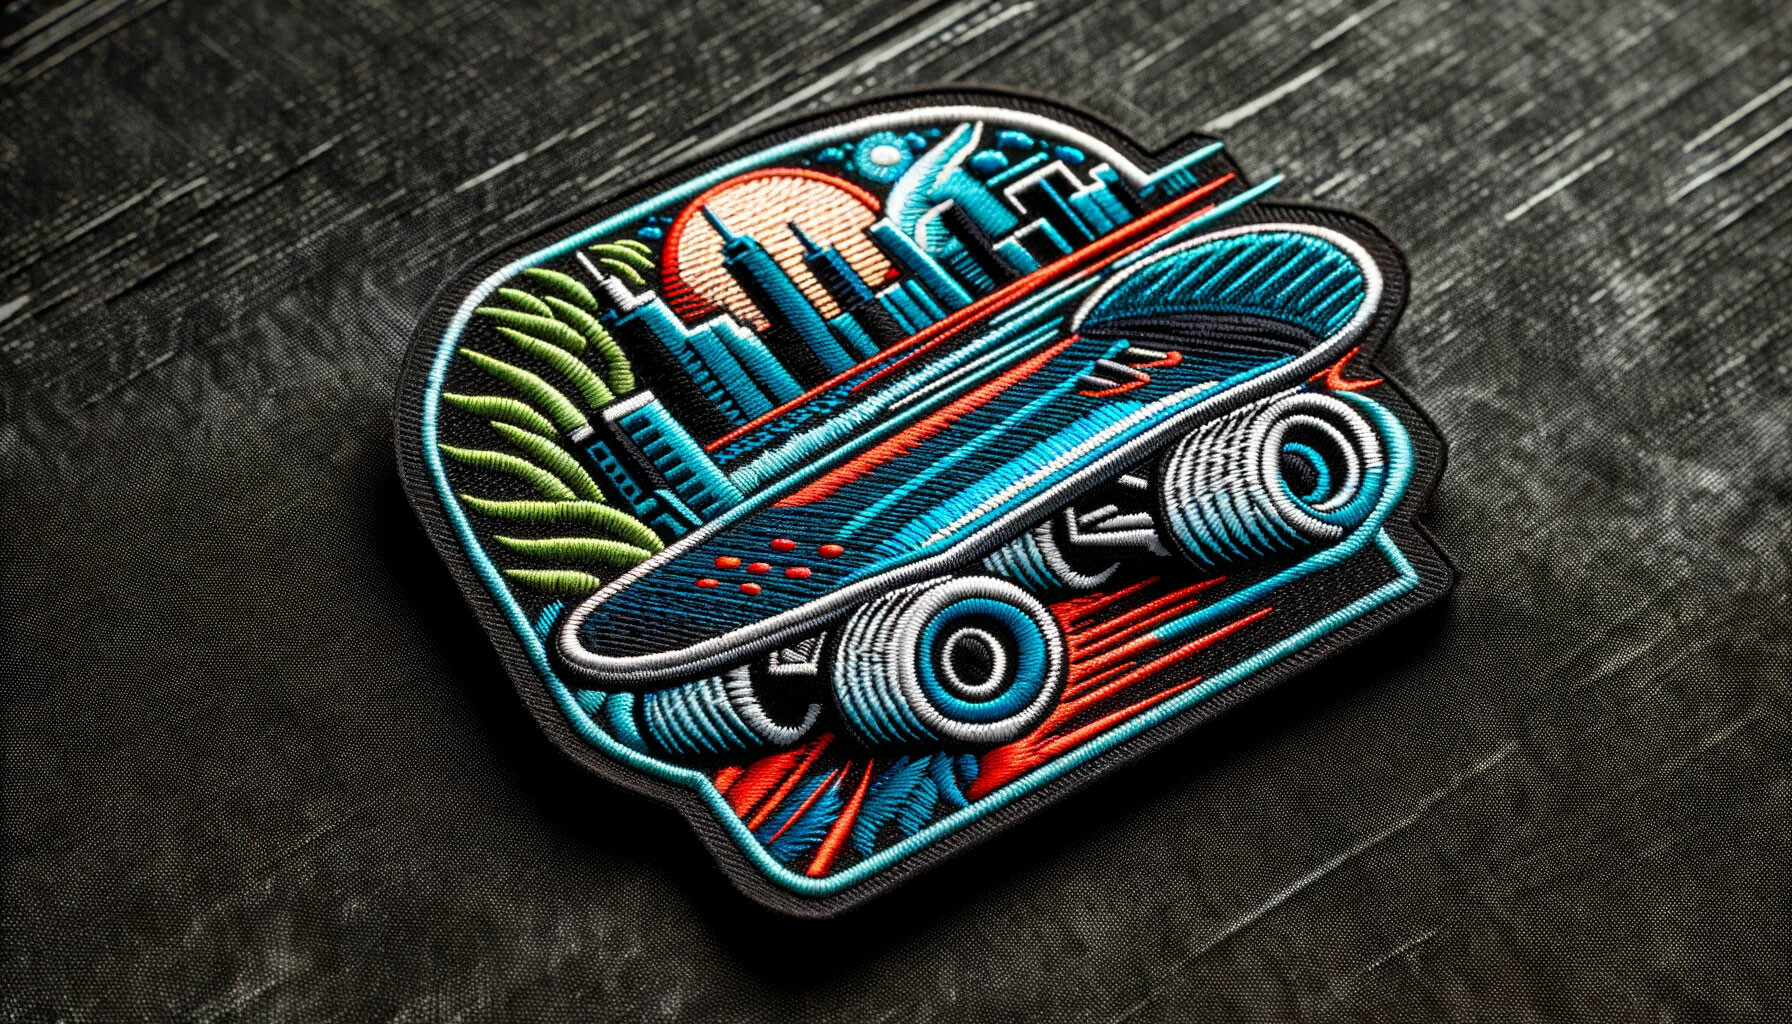 Emblems of Expression: Custom Skateboarding Patches